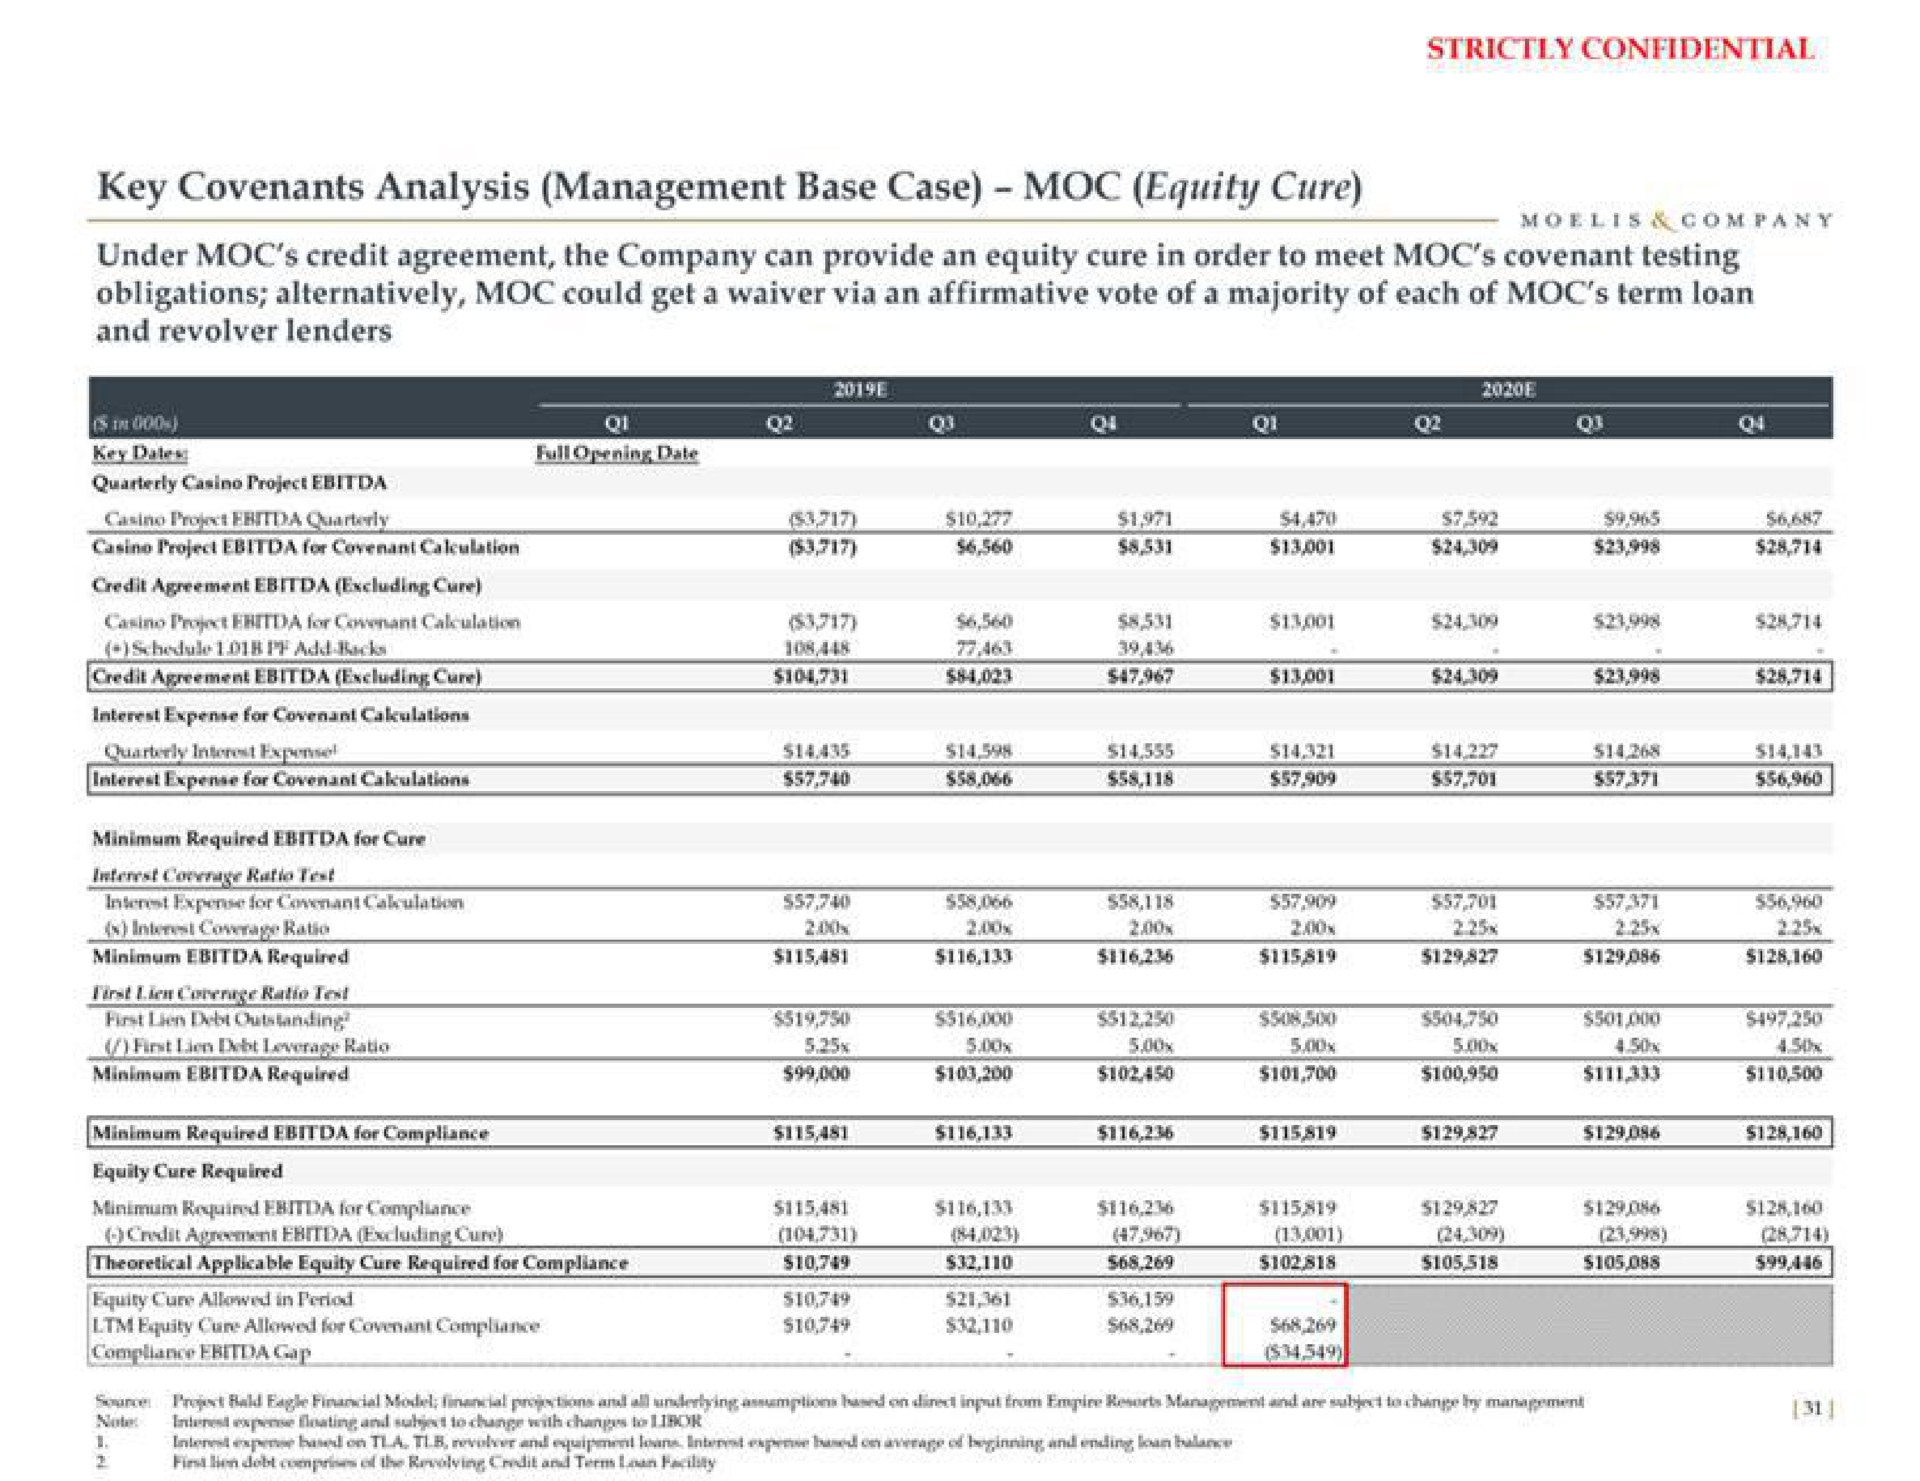 key covenants analysis management base case equity cure under credit agreement the company can provide an equity cure in order to meet covenant testing obligations alternatively could get a waiver via an affirmative vote of a majority of each of term loan and revolver lenders minimum required for compliance | Moelis & Company